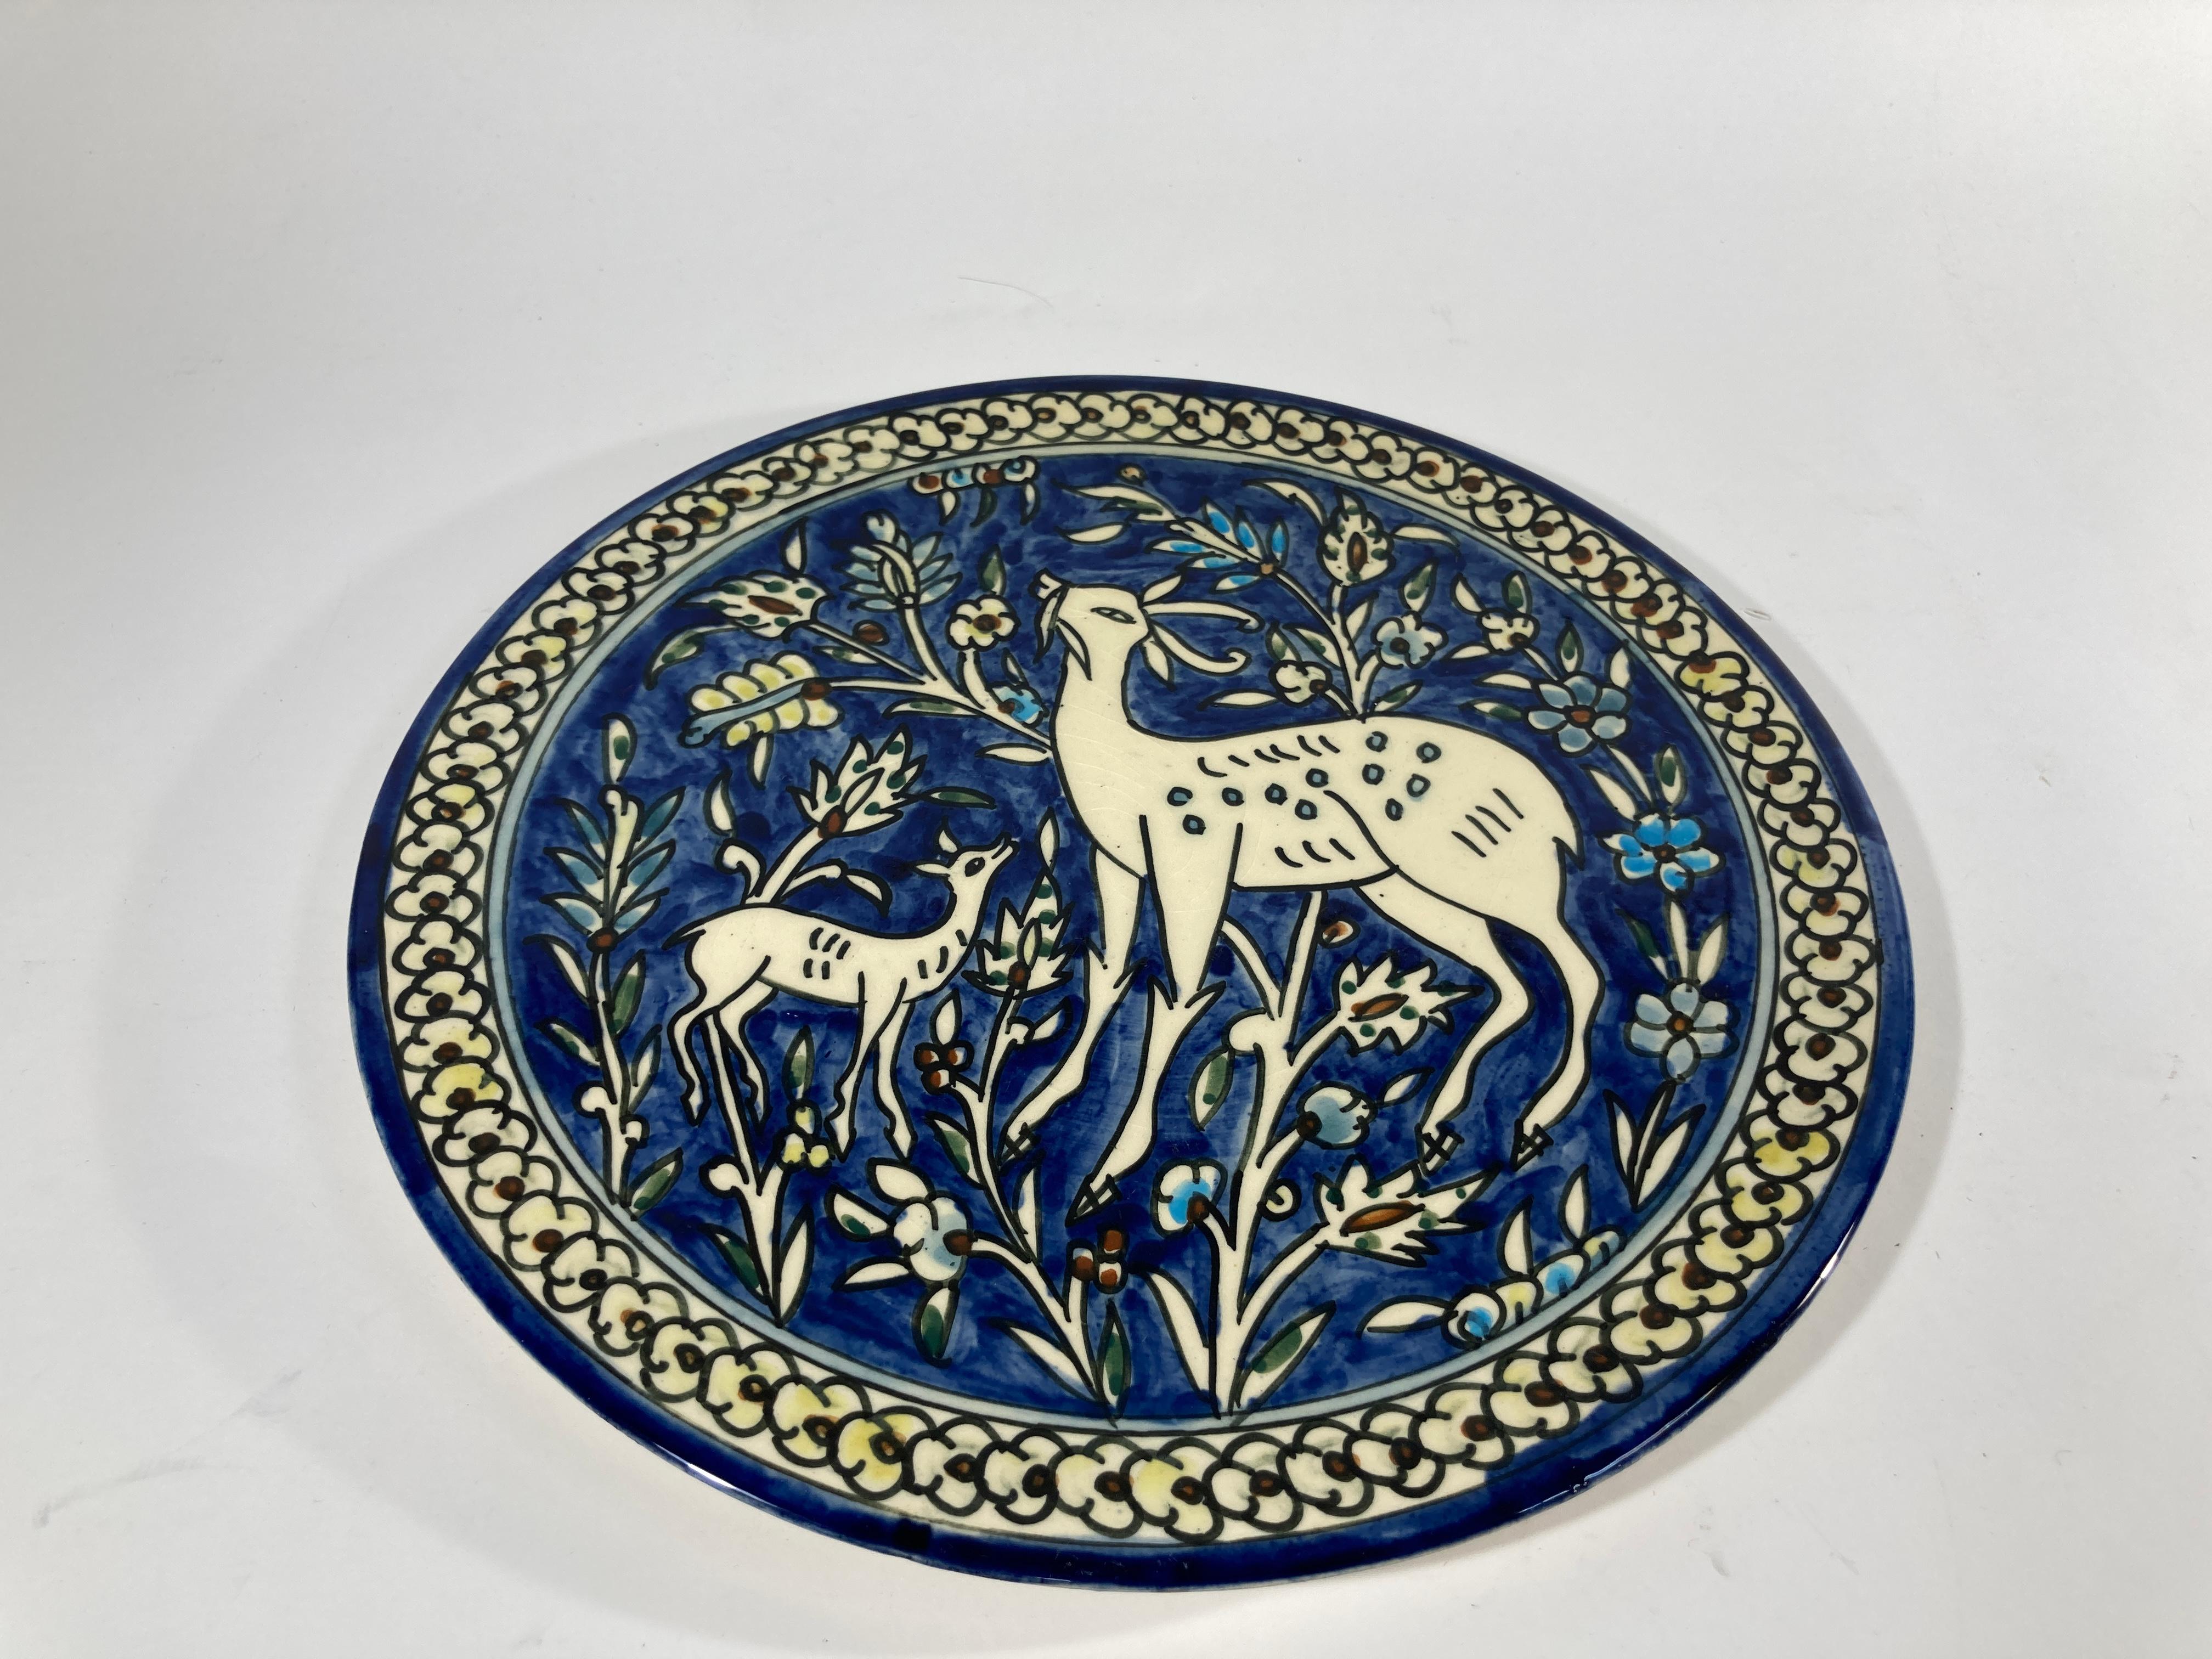 Vintage hand painted and handcrafted ceramic wall decorative plate with polychrome deer scene. 
It has a beautifully hand painted scene with deers enjoying the outdoors , surrounded by flowers in blue and white, turquoise, light and dark green